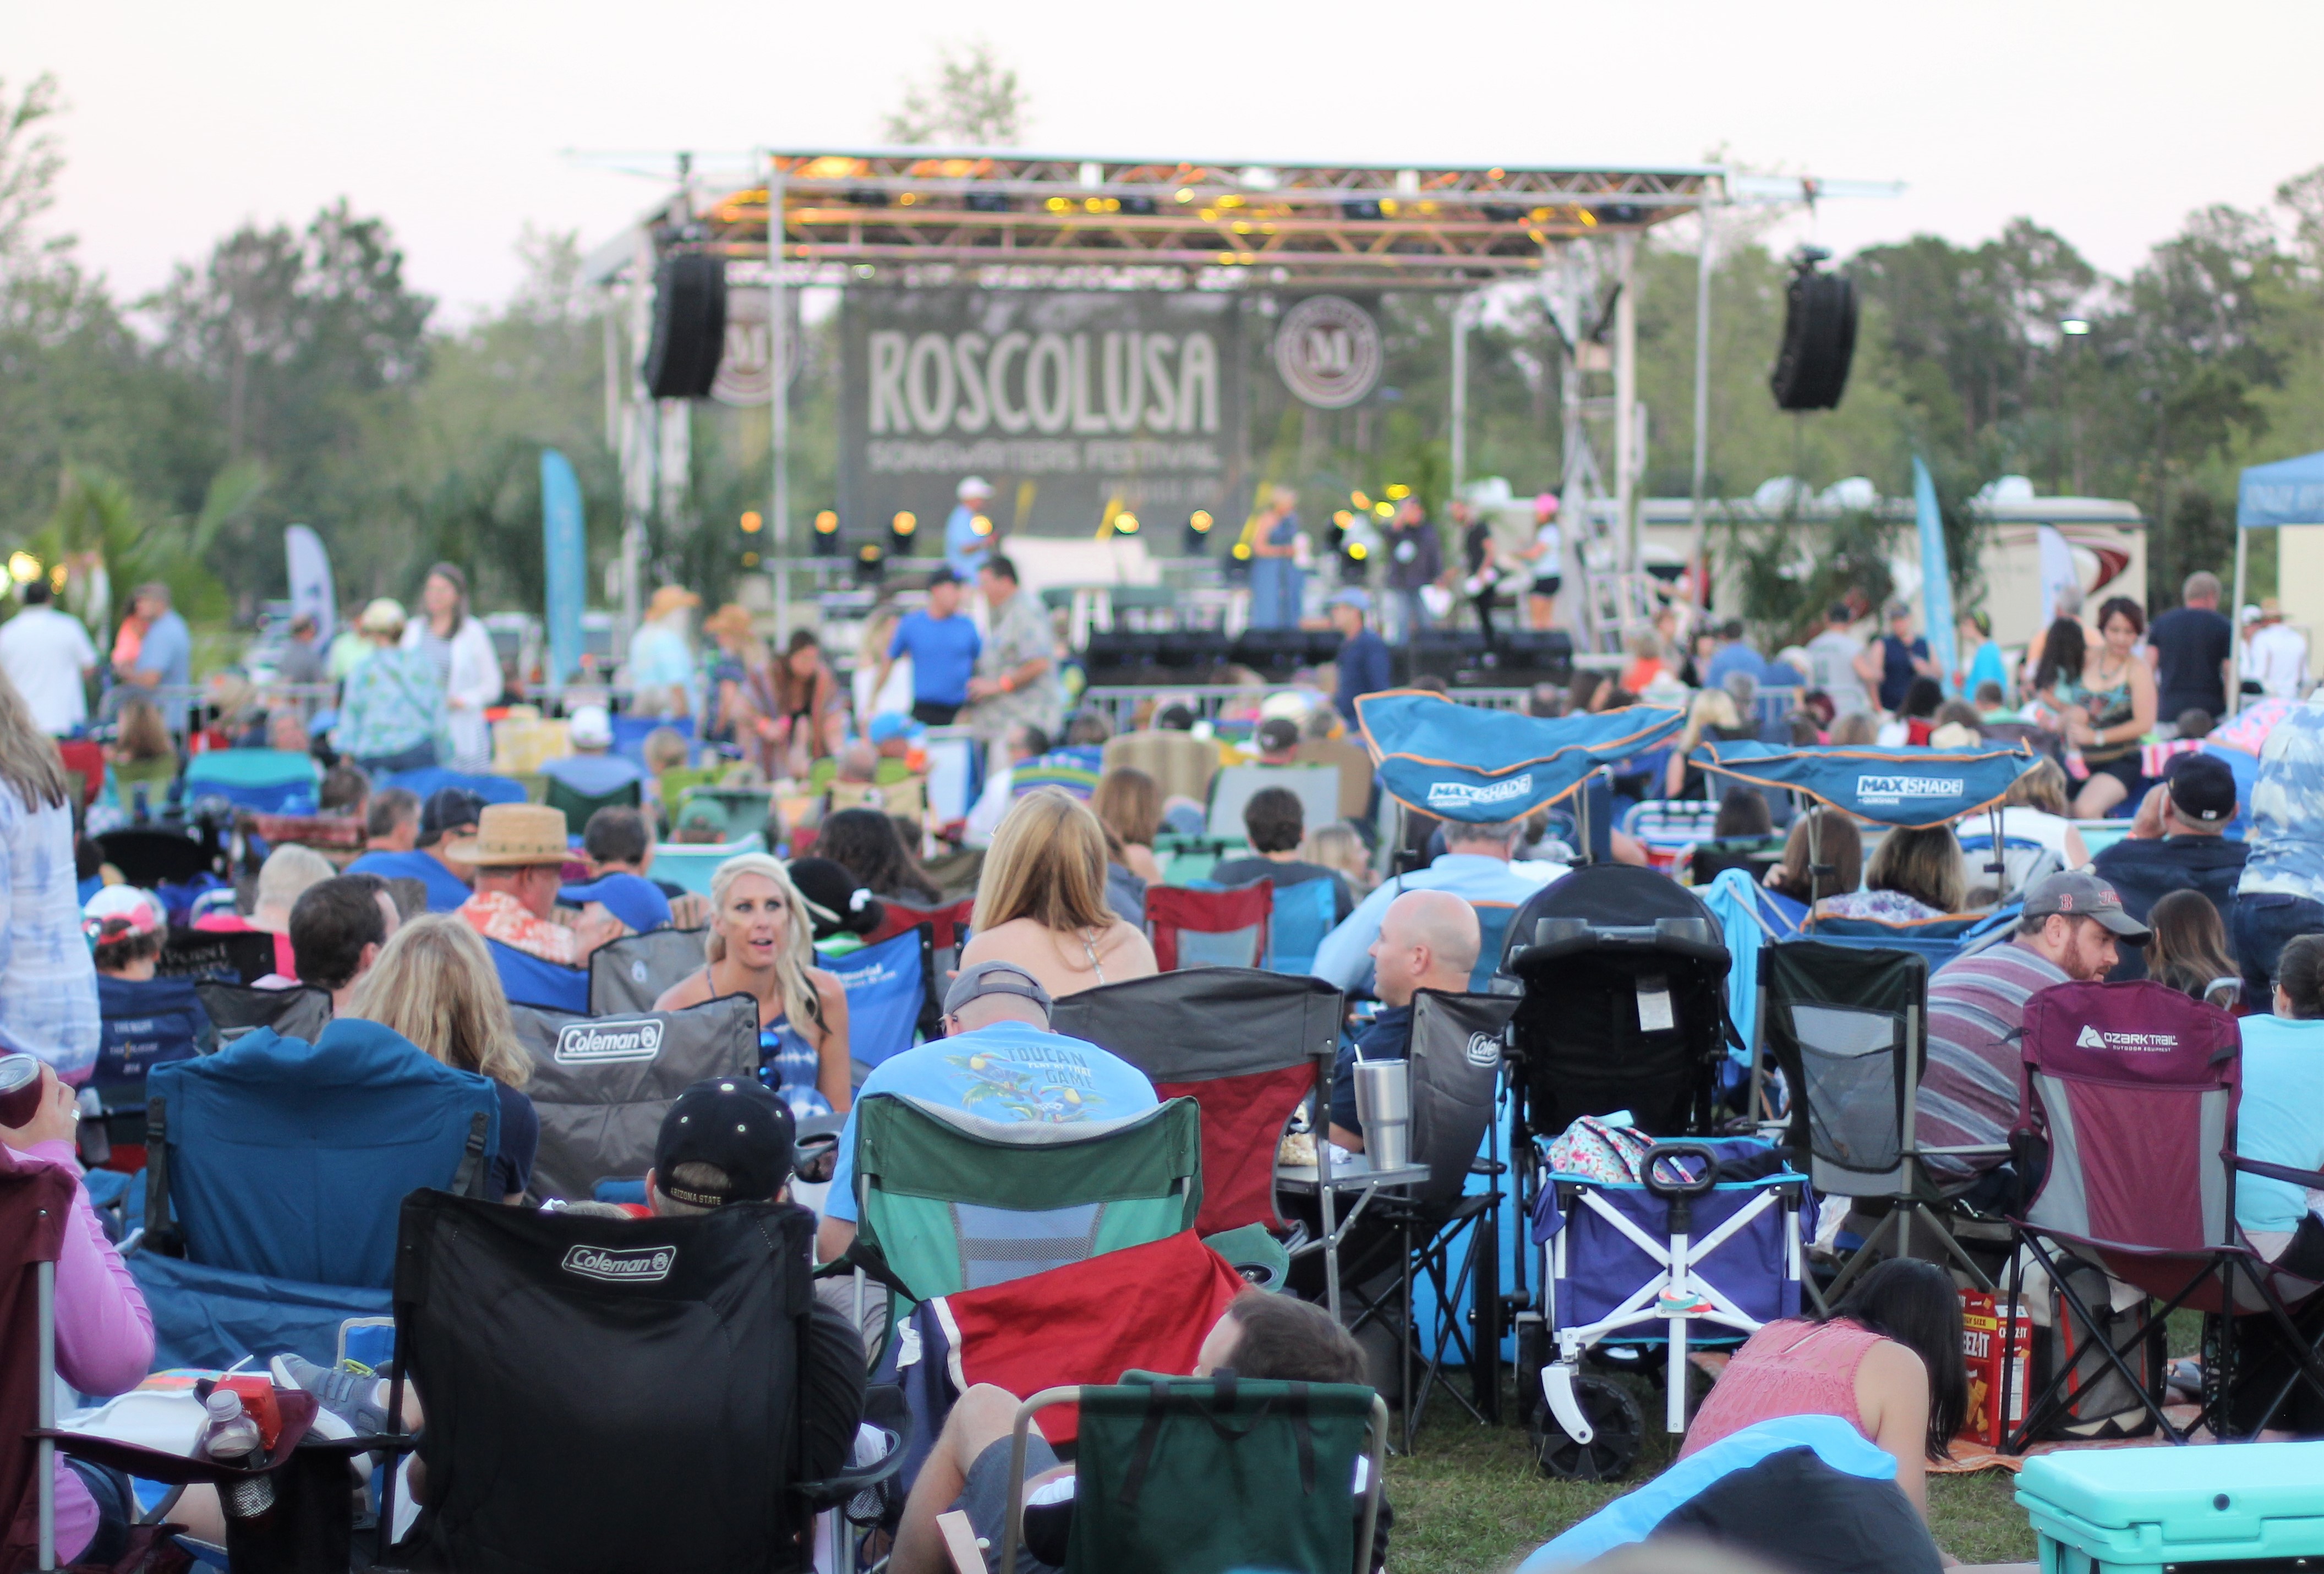 Roscolusa Songwriters Festival Nocatee